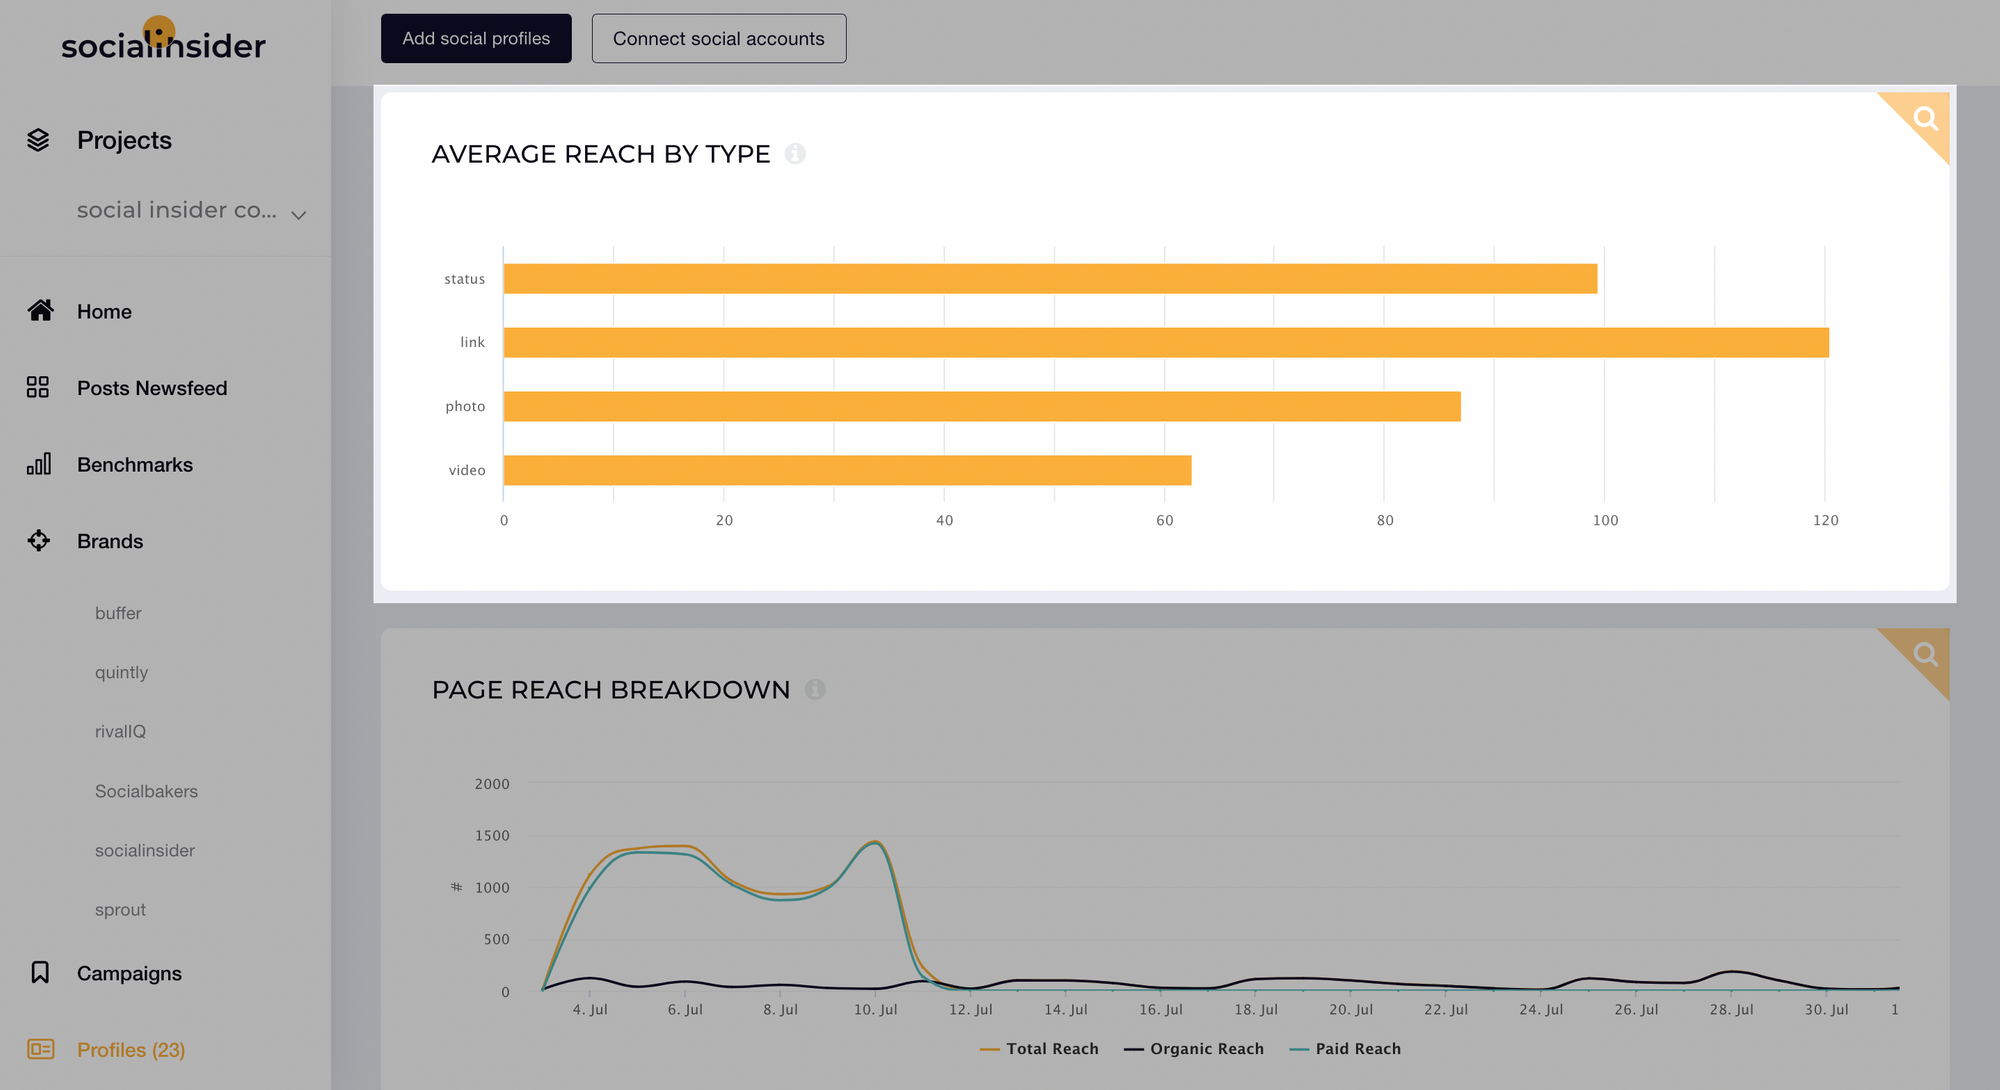 Average reach by type on Facebook for Socialinsider